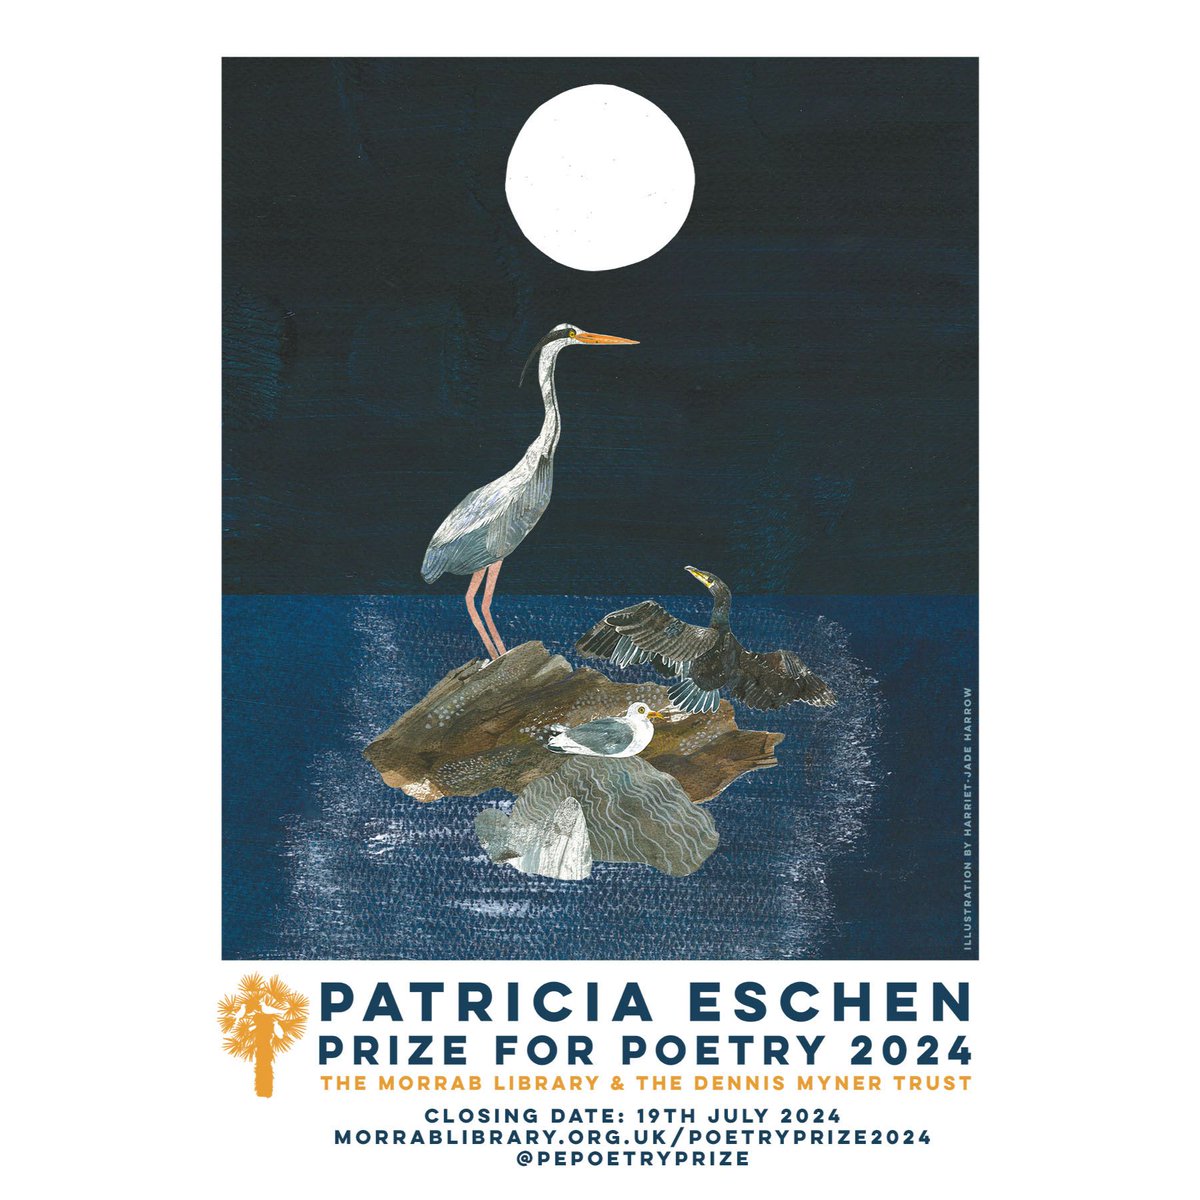 The Patricia Eschen Prize for Poetry 2024 is now open for entries! The international poetry competition will be judged by @KatrinaNaomi, with a new “Sonnet Prize” for the best poem in this form judged by Jodie Hollander. Find out more: morrablibrary.org.uk/poetryprize202… @morrablibrary